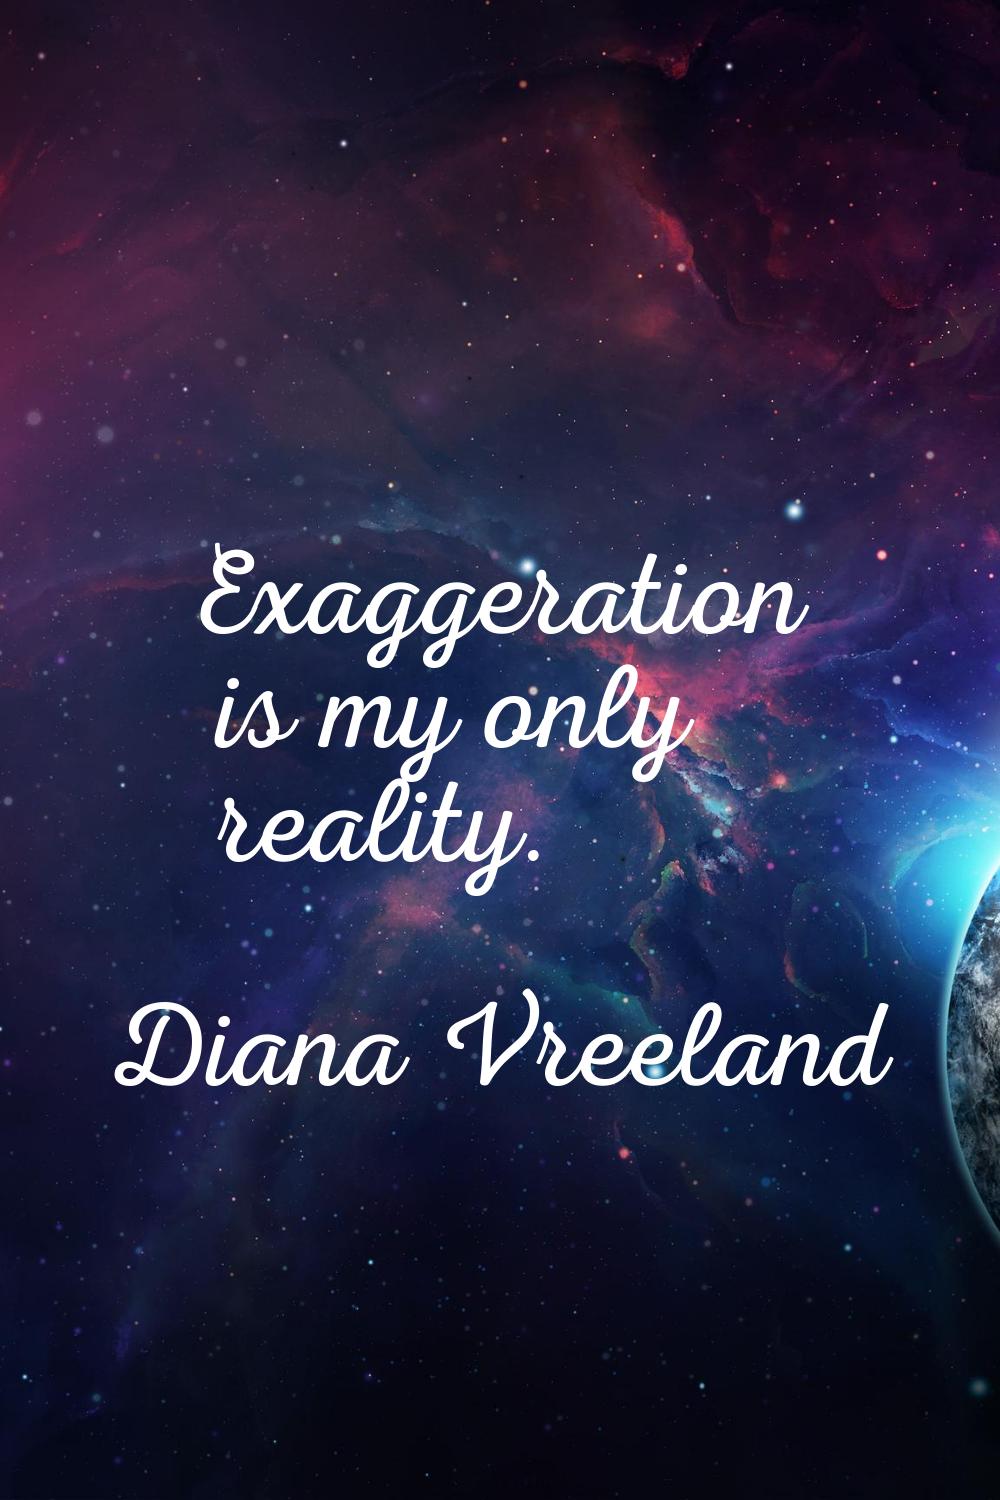 Exaggeration is my only reality.